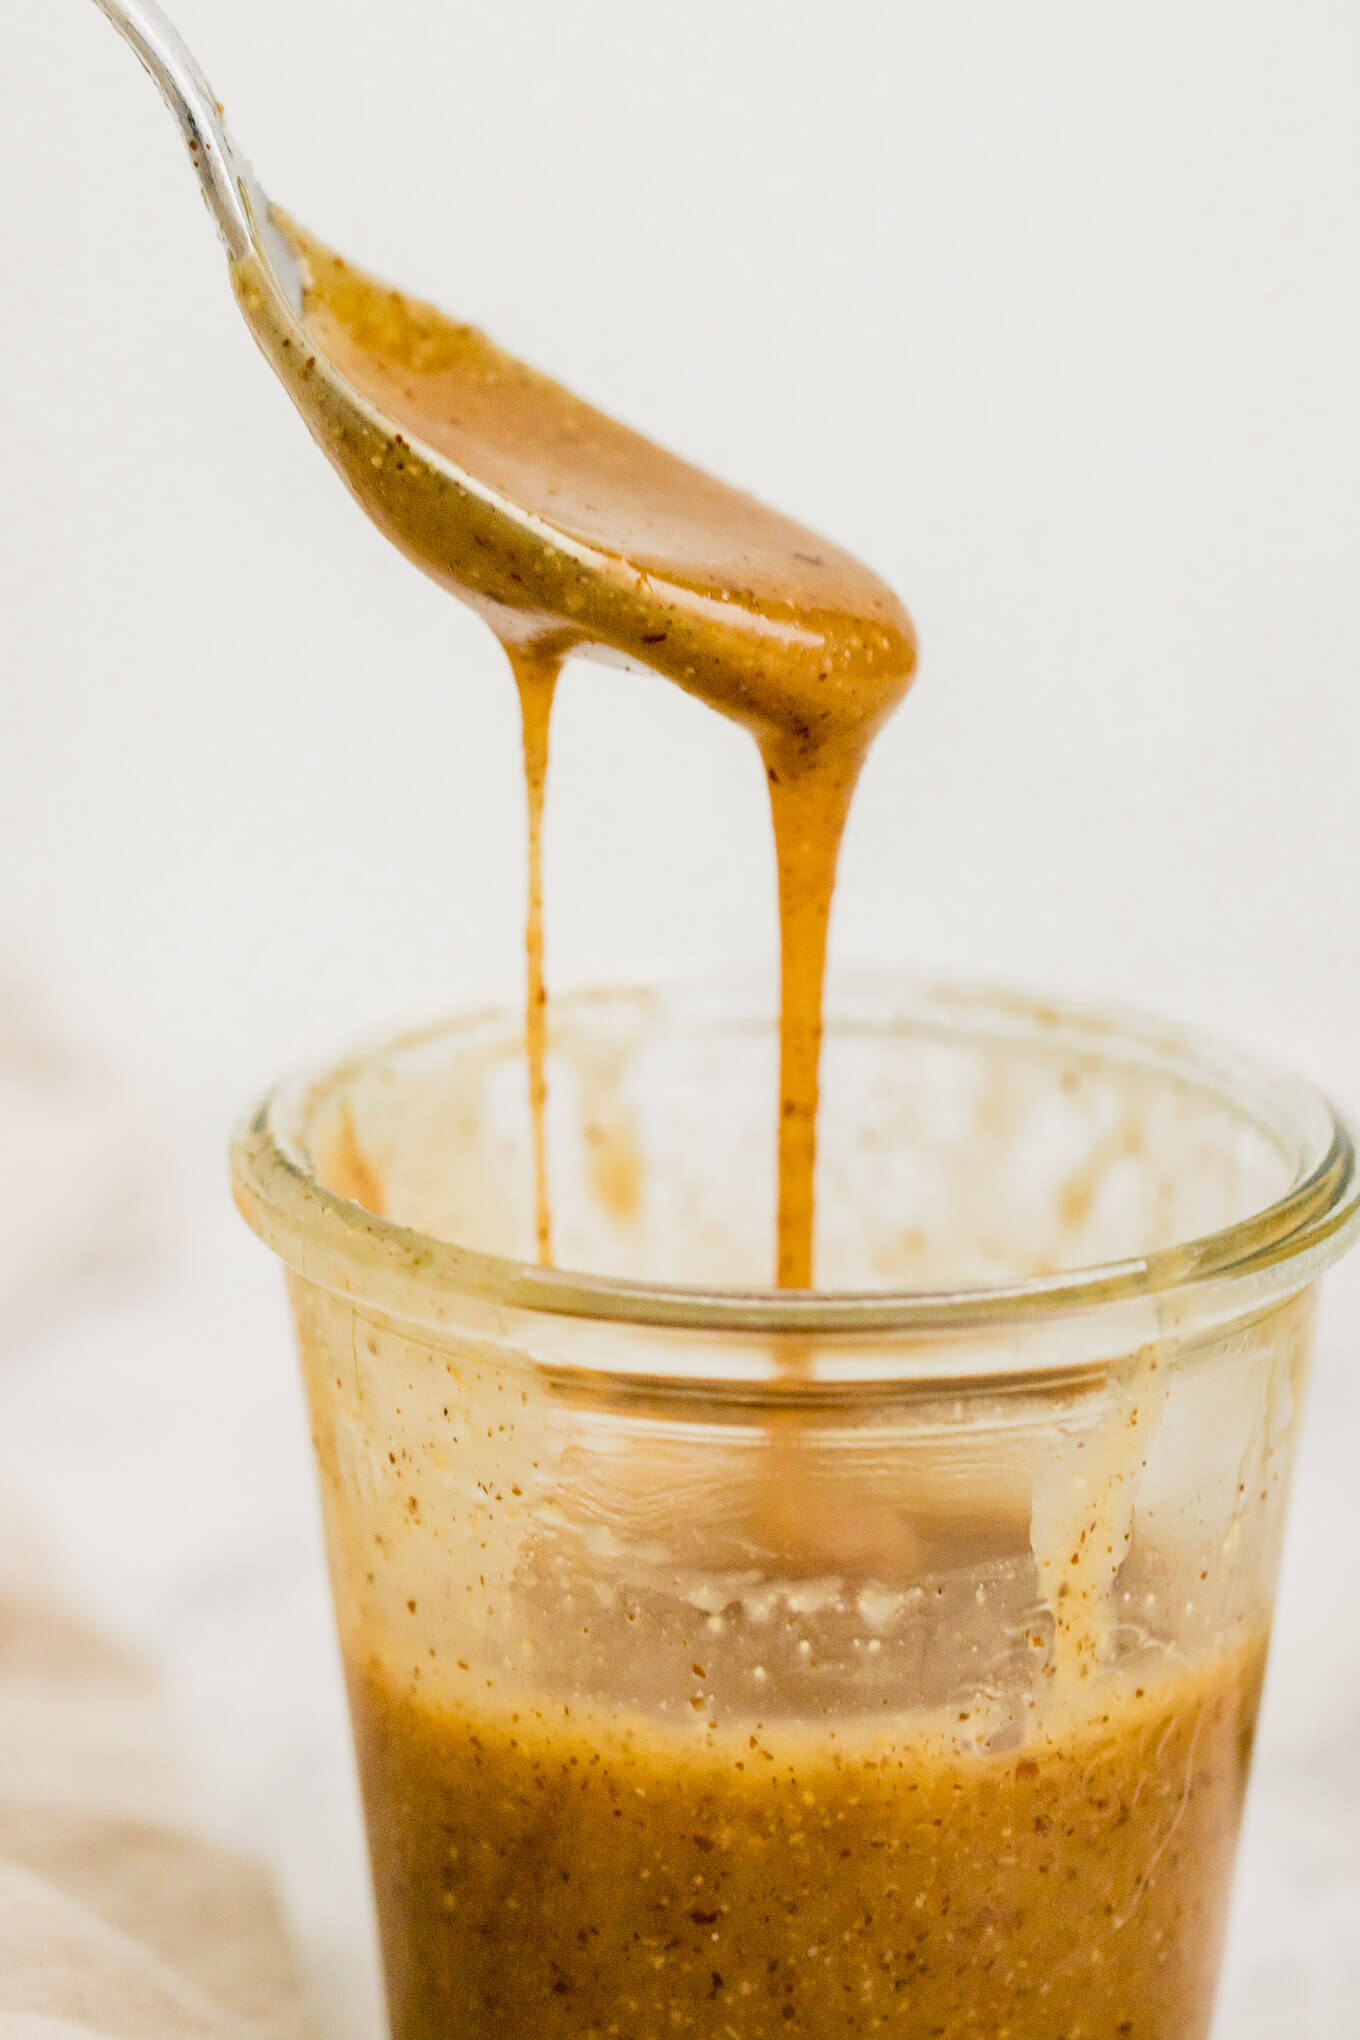 Easy 5-minute vegan caramel sauce made with almond butter, coconut oil, vanilla and salt.